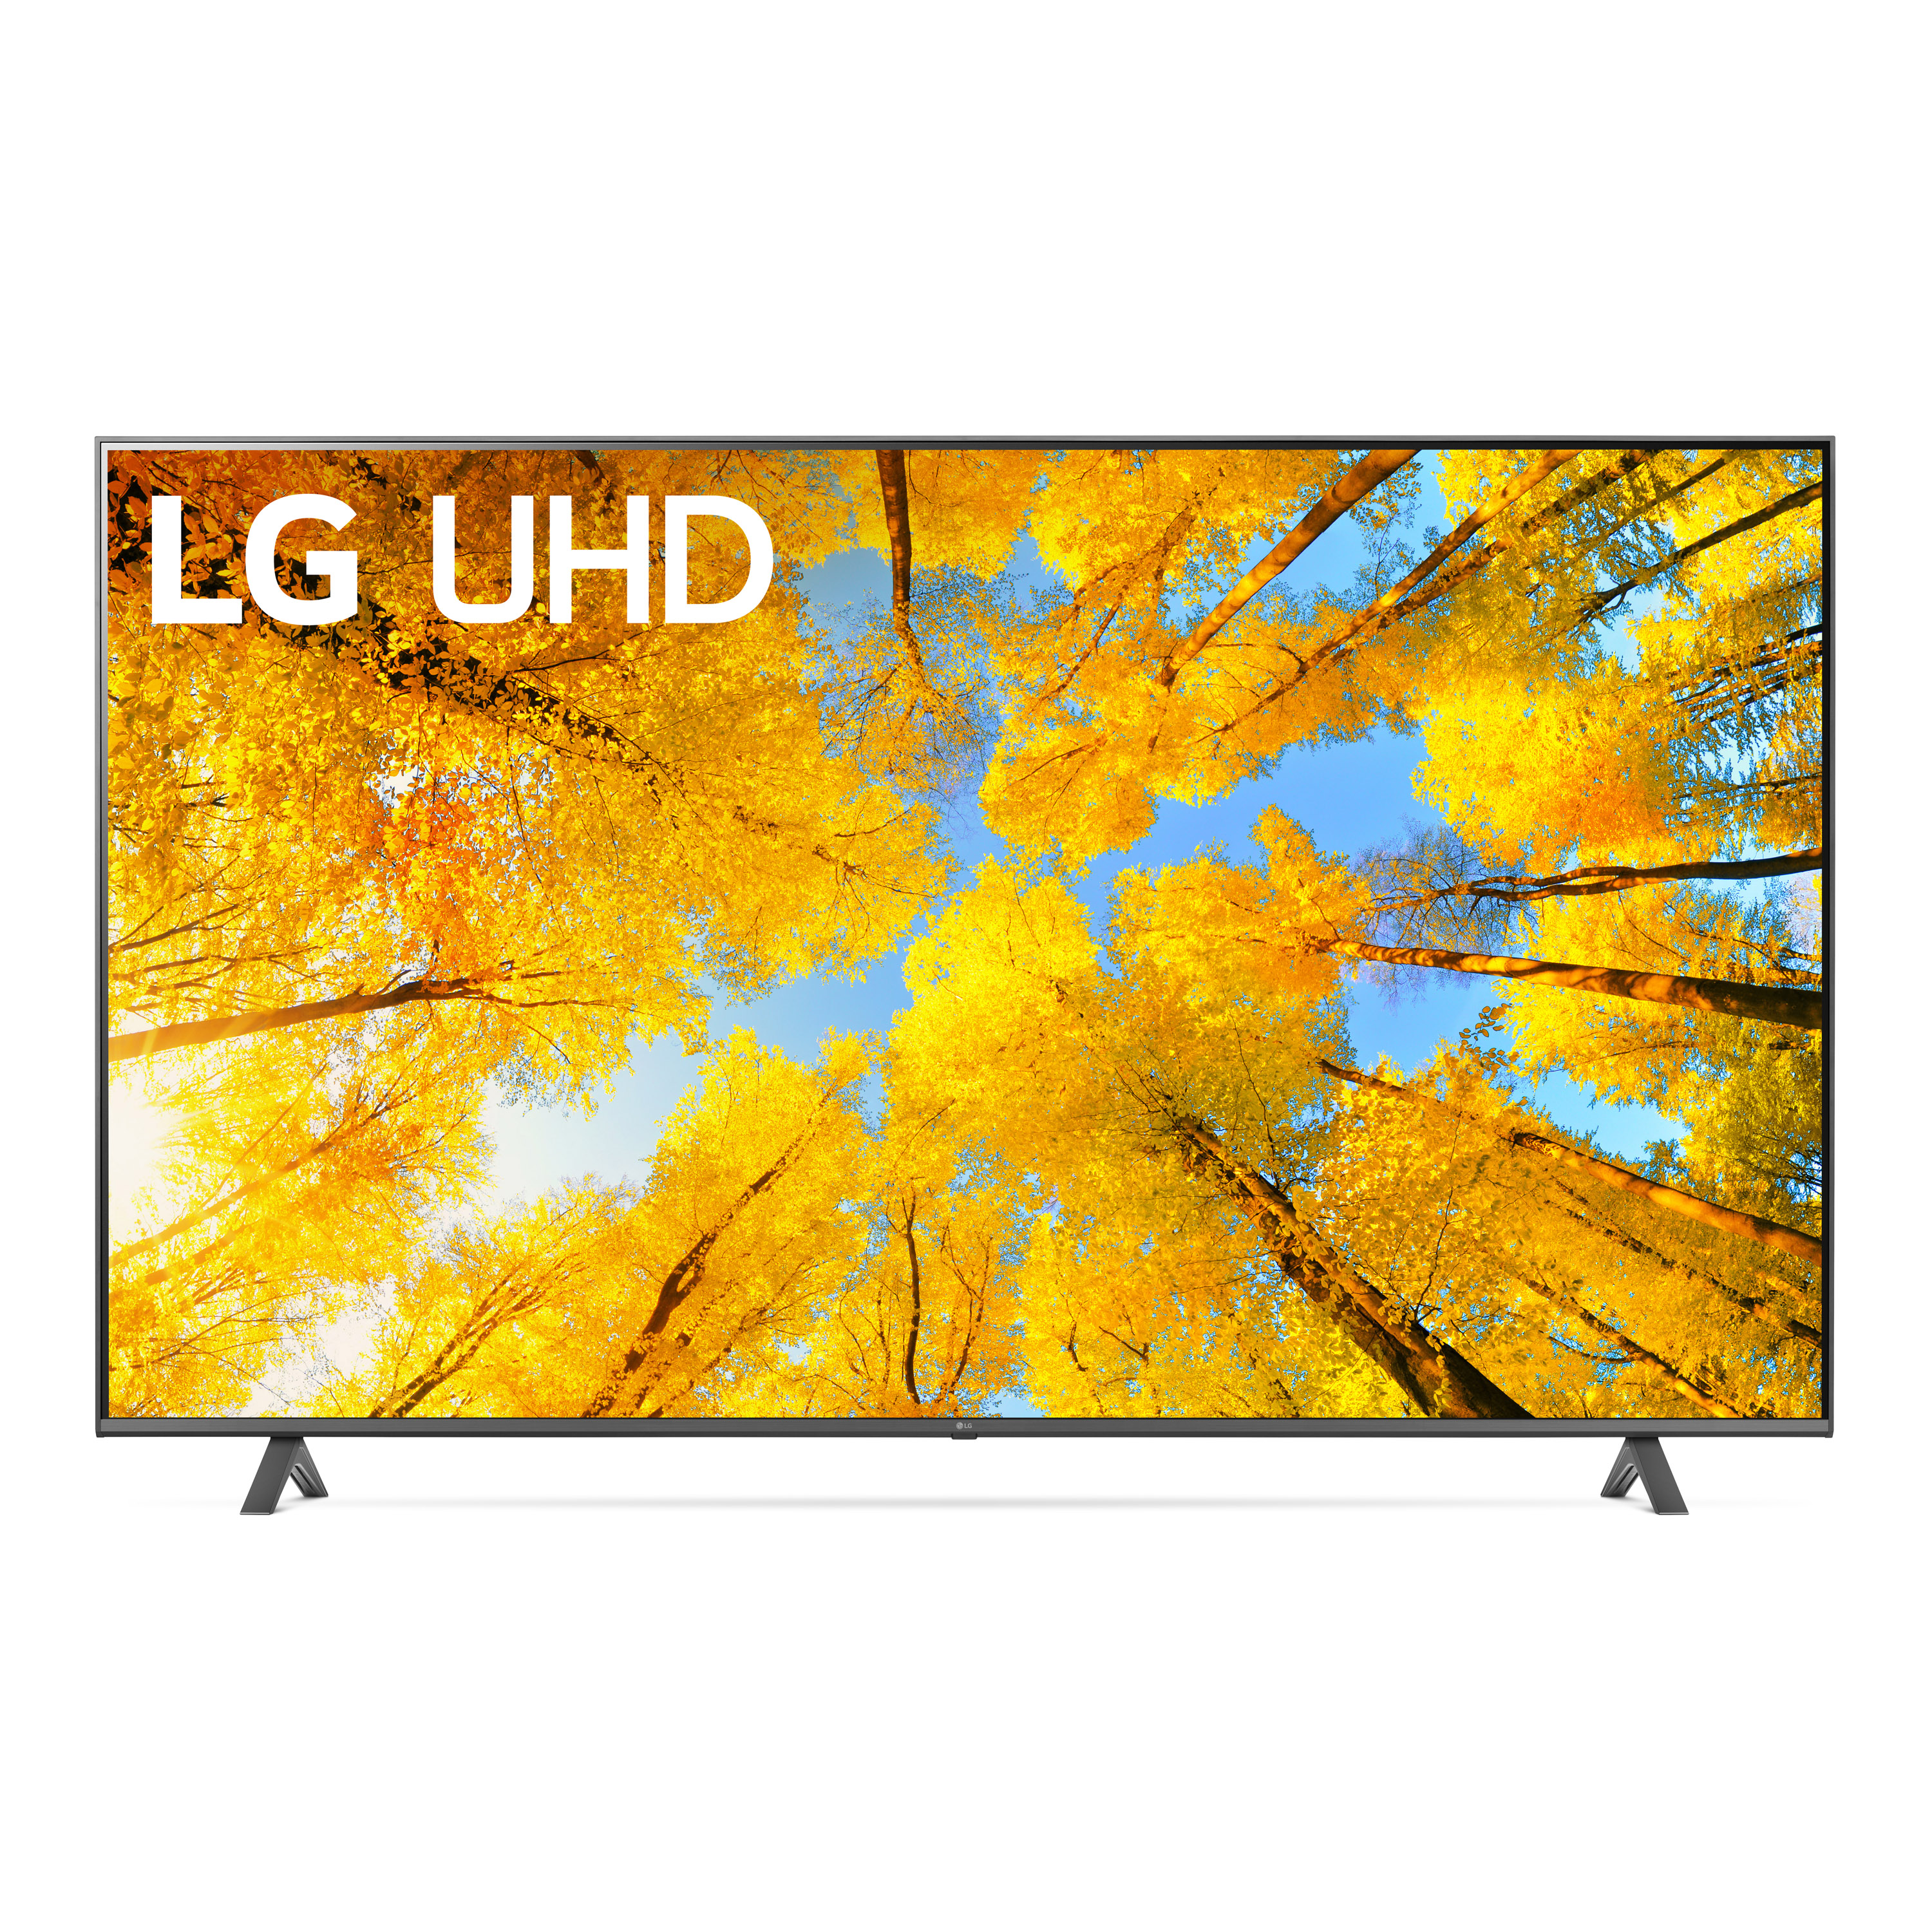 LG 86 inches Class 4K UHD 2160P WebOS22 Smart TV with Active HDR UQ7590 Series 86UQ7590PUD - image 1 of 14